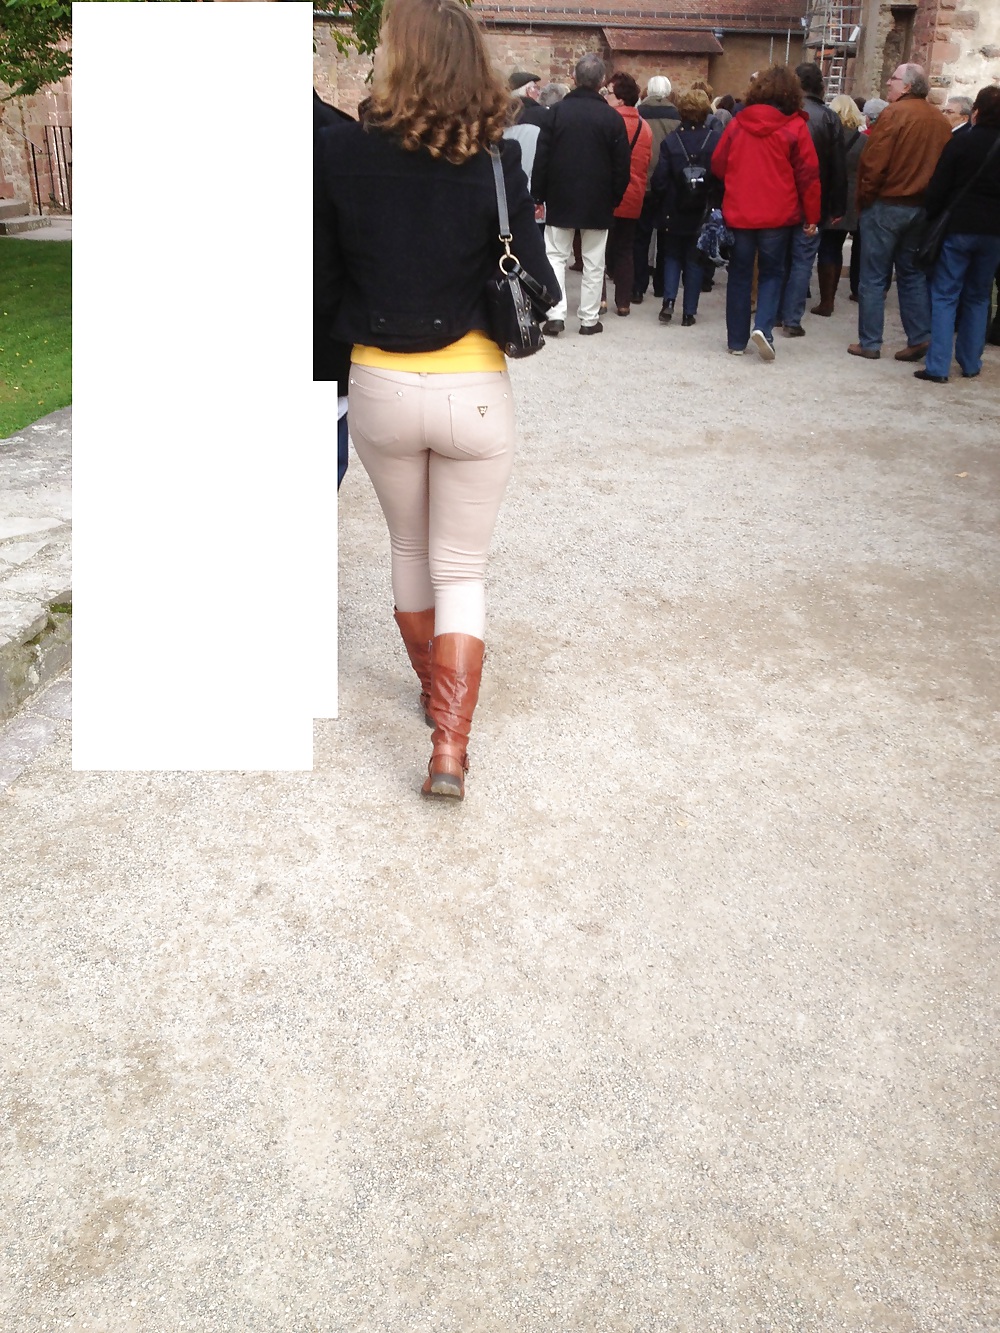 Candid Ass in tight Jeans and Boots - Voyeur #12048453